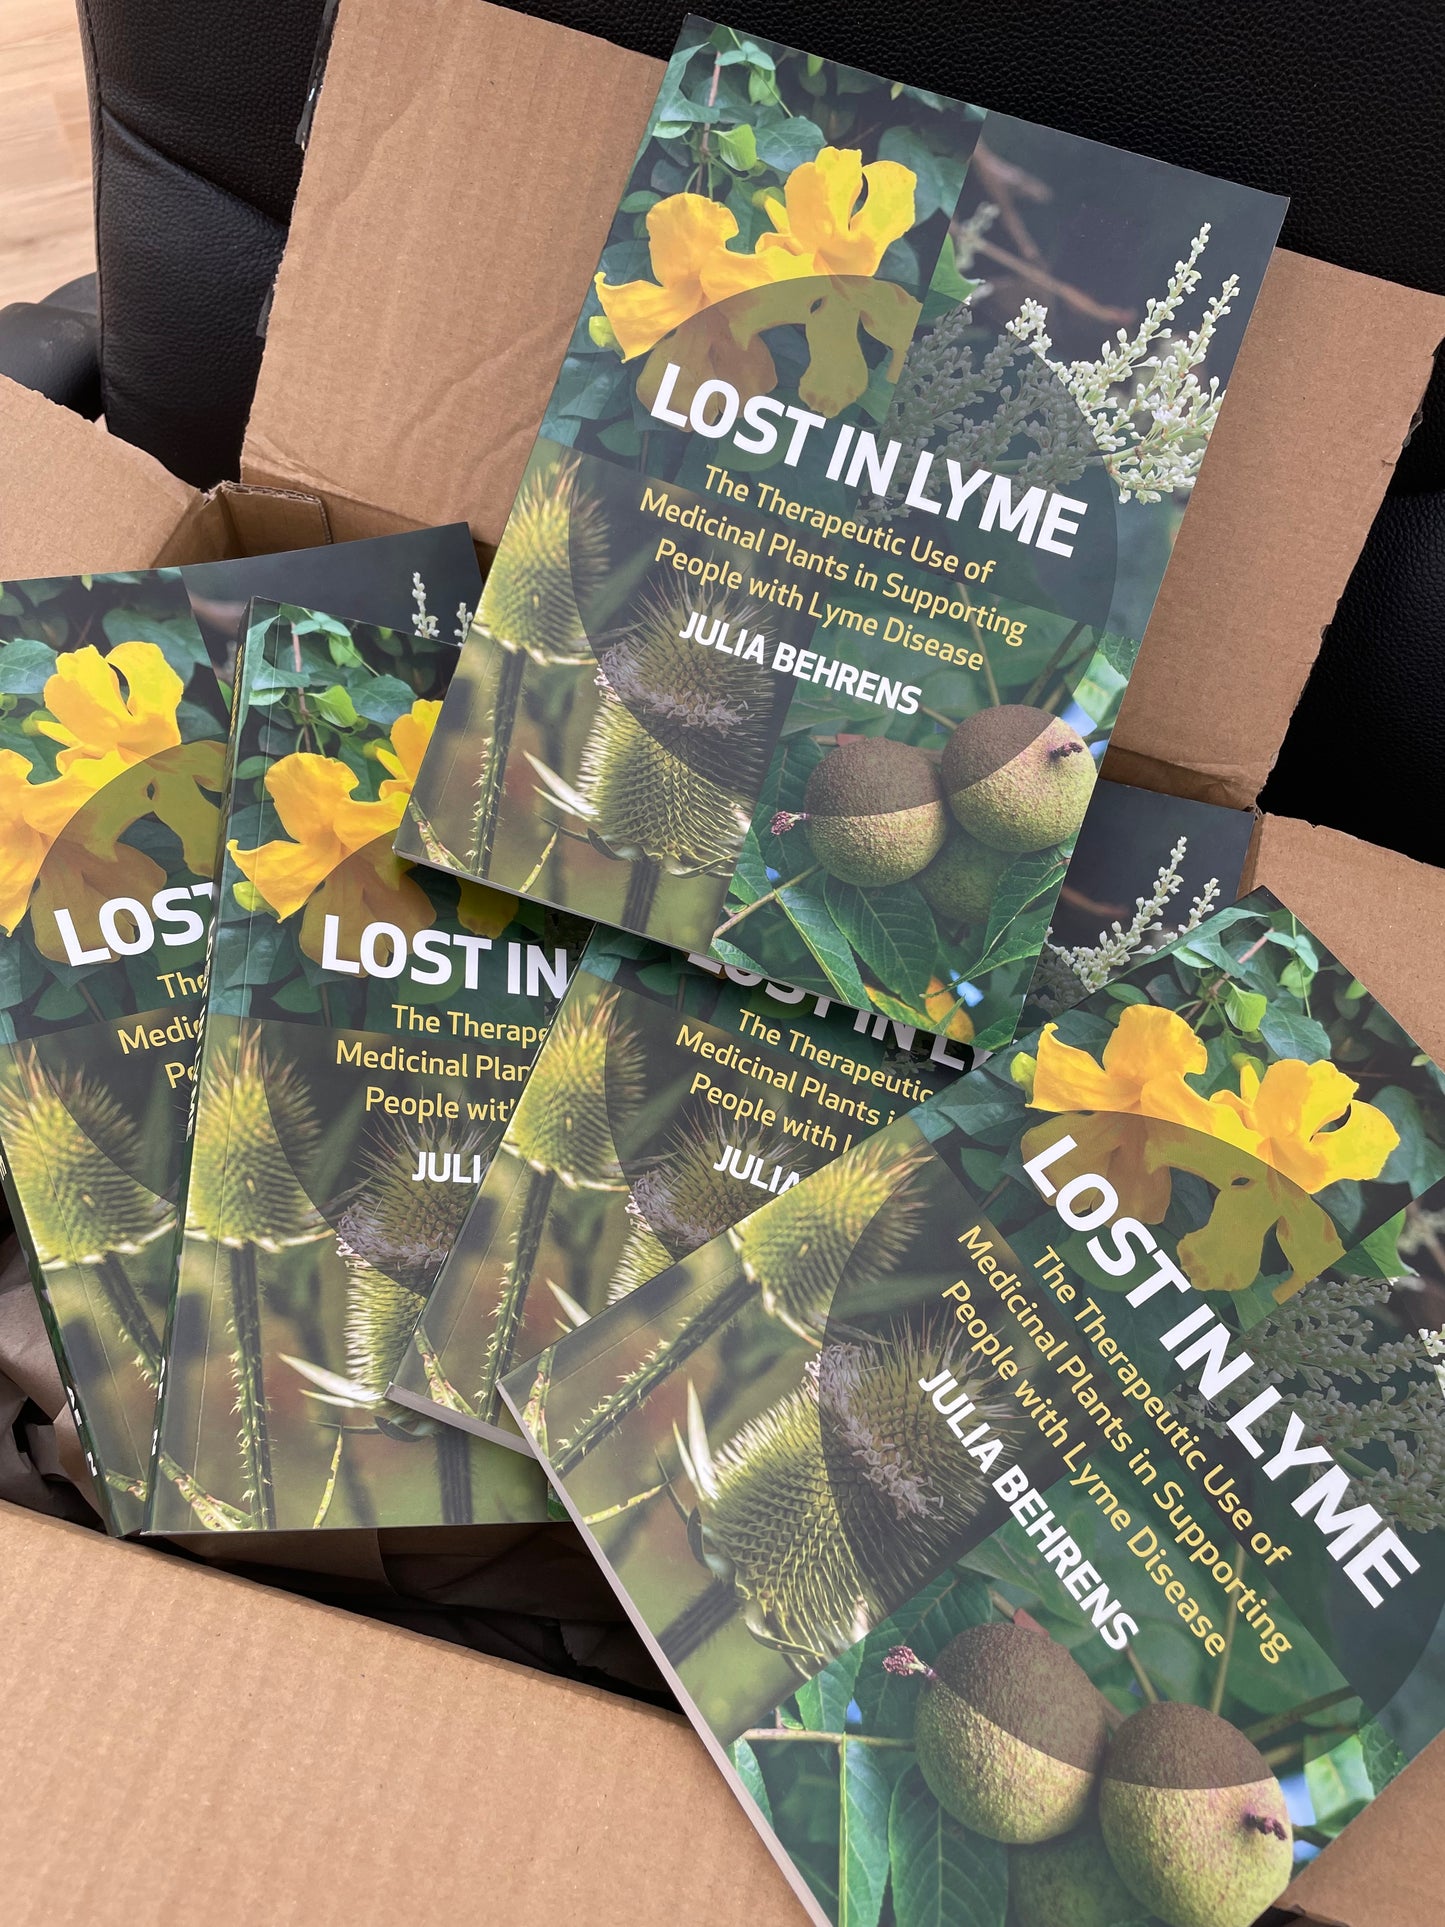 LOST IN LYME book by Julia Behrens